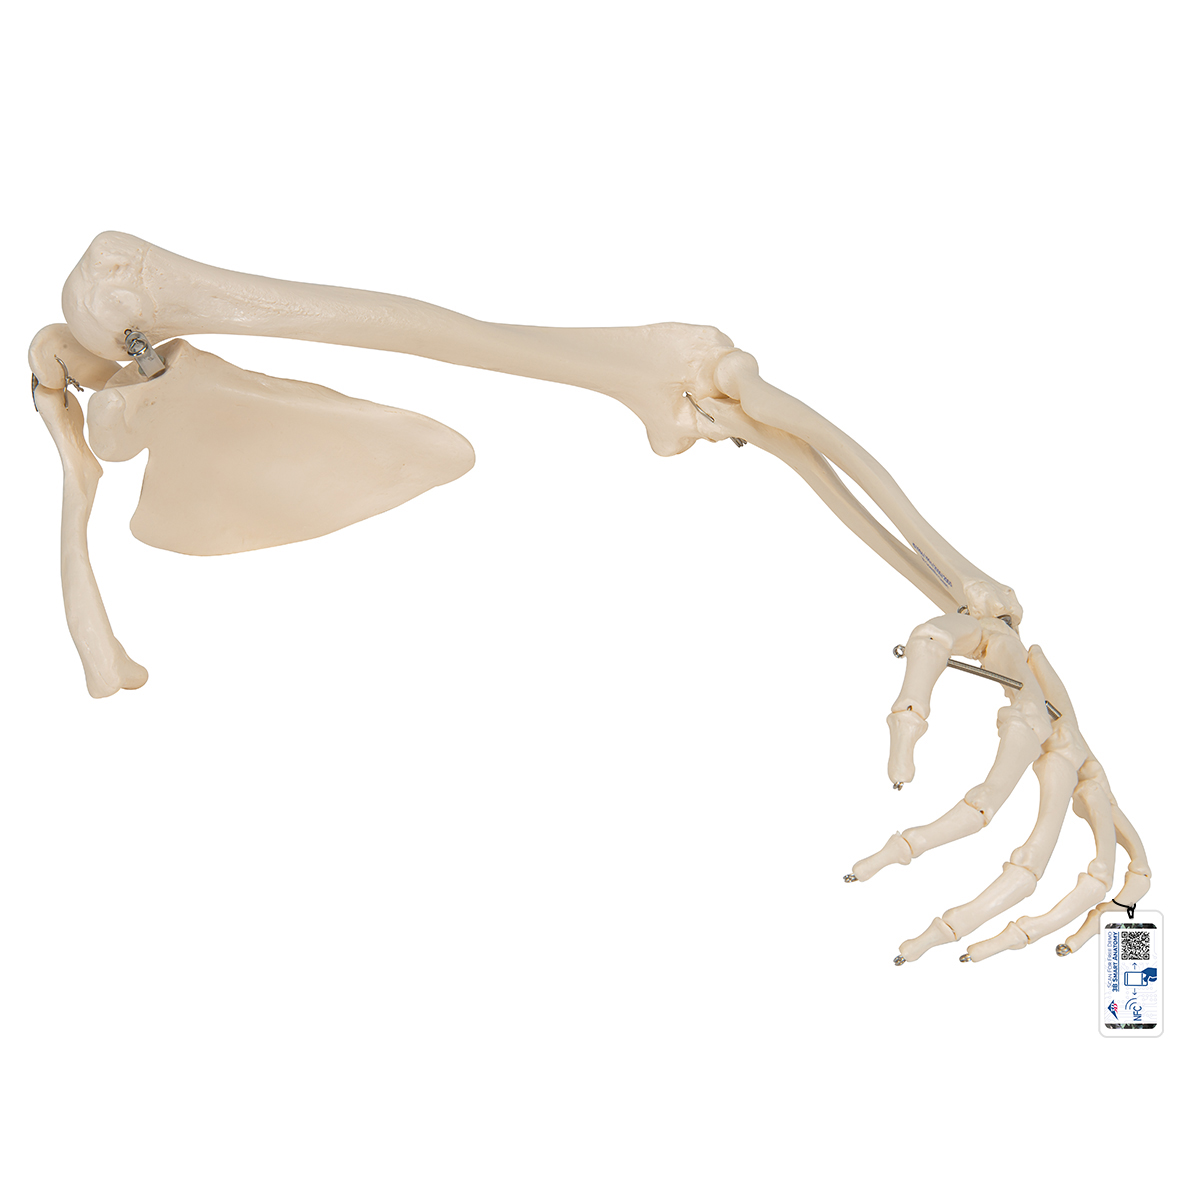 Human Arm Skeleton Model with Scapula & Clavicle - 3B Smart